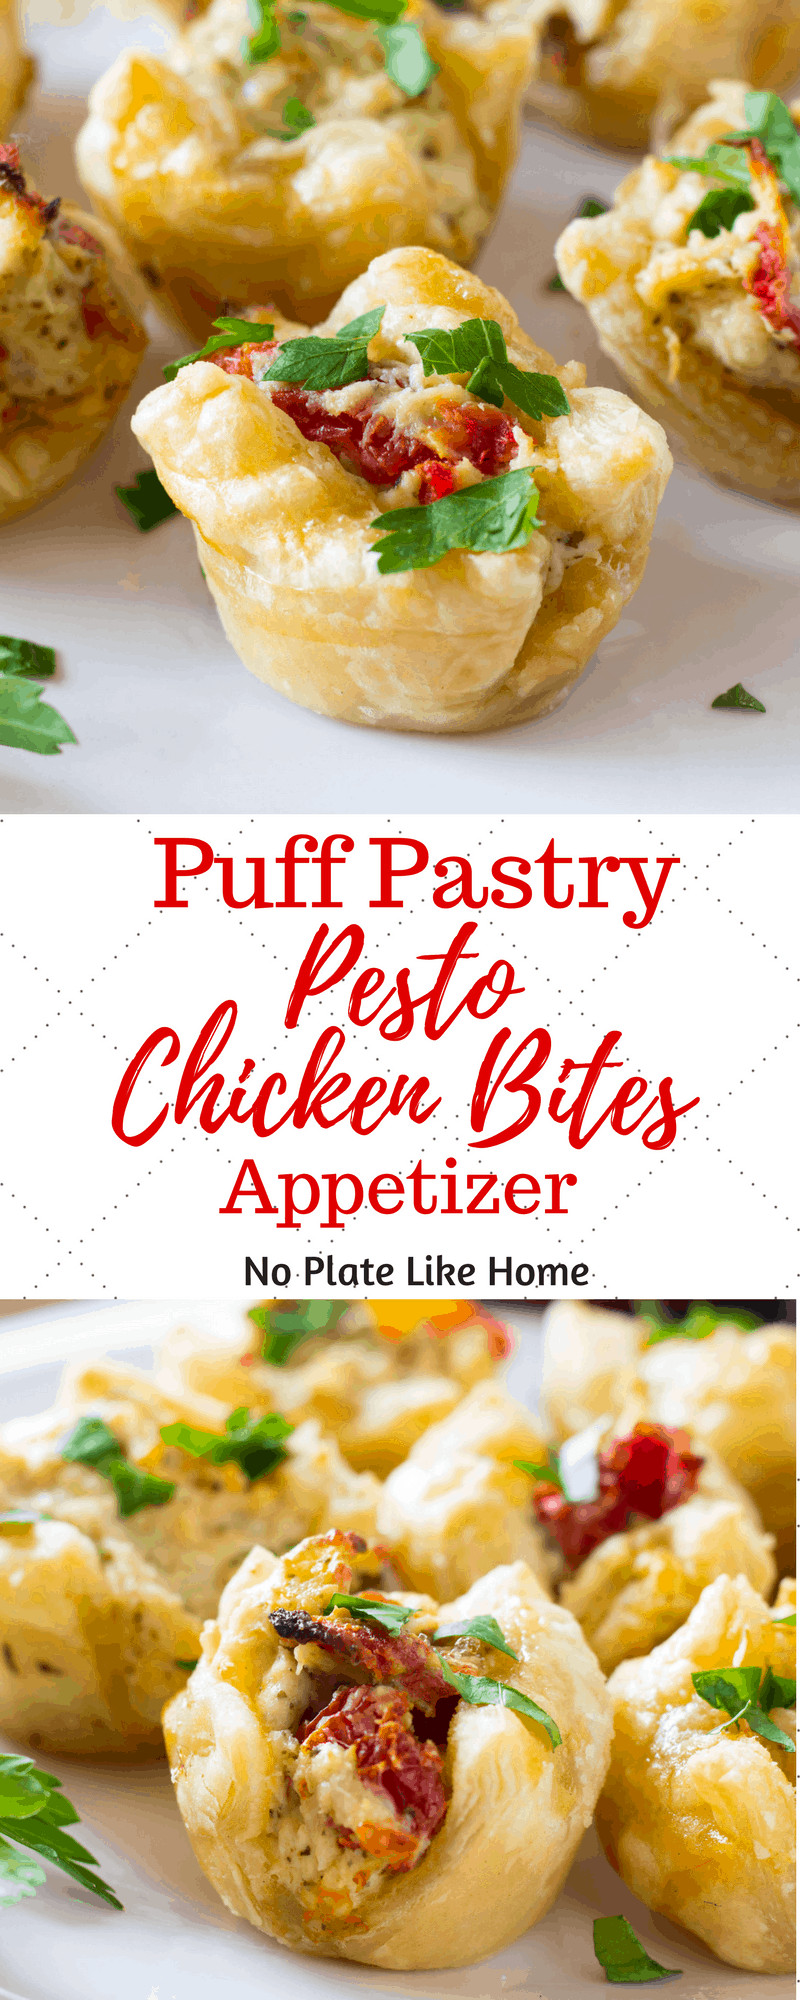 Puff Pastry Appetizers
 Puff Pastry Pesto Chicken Bites Appetizer No Plate Like Home